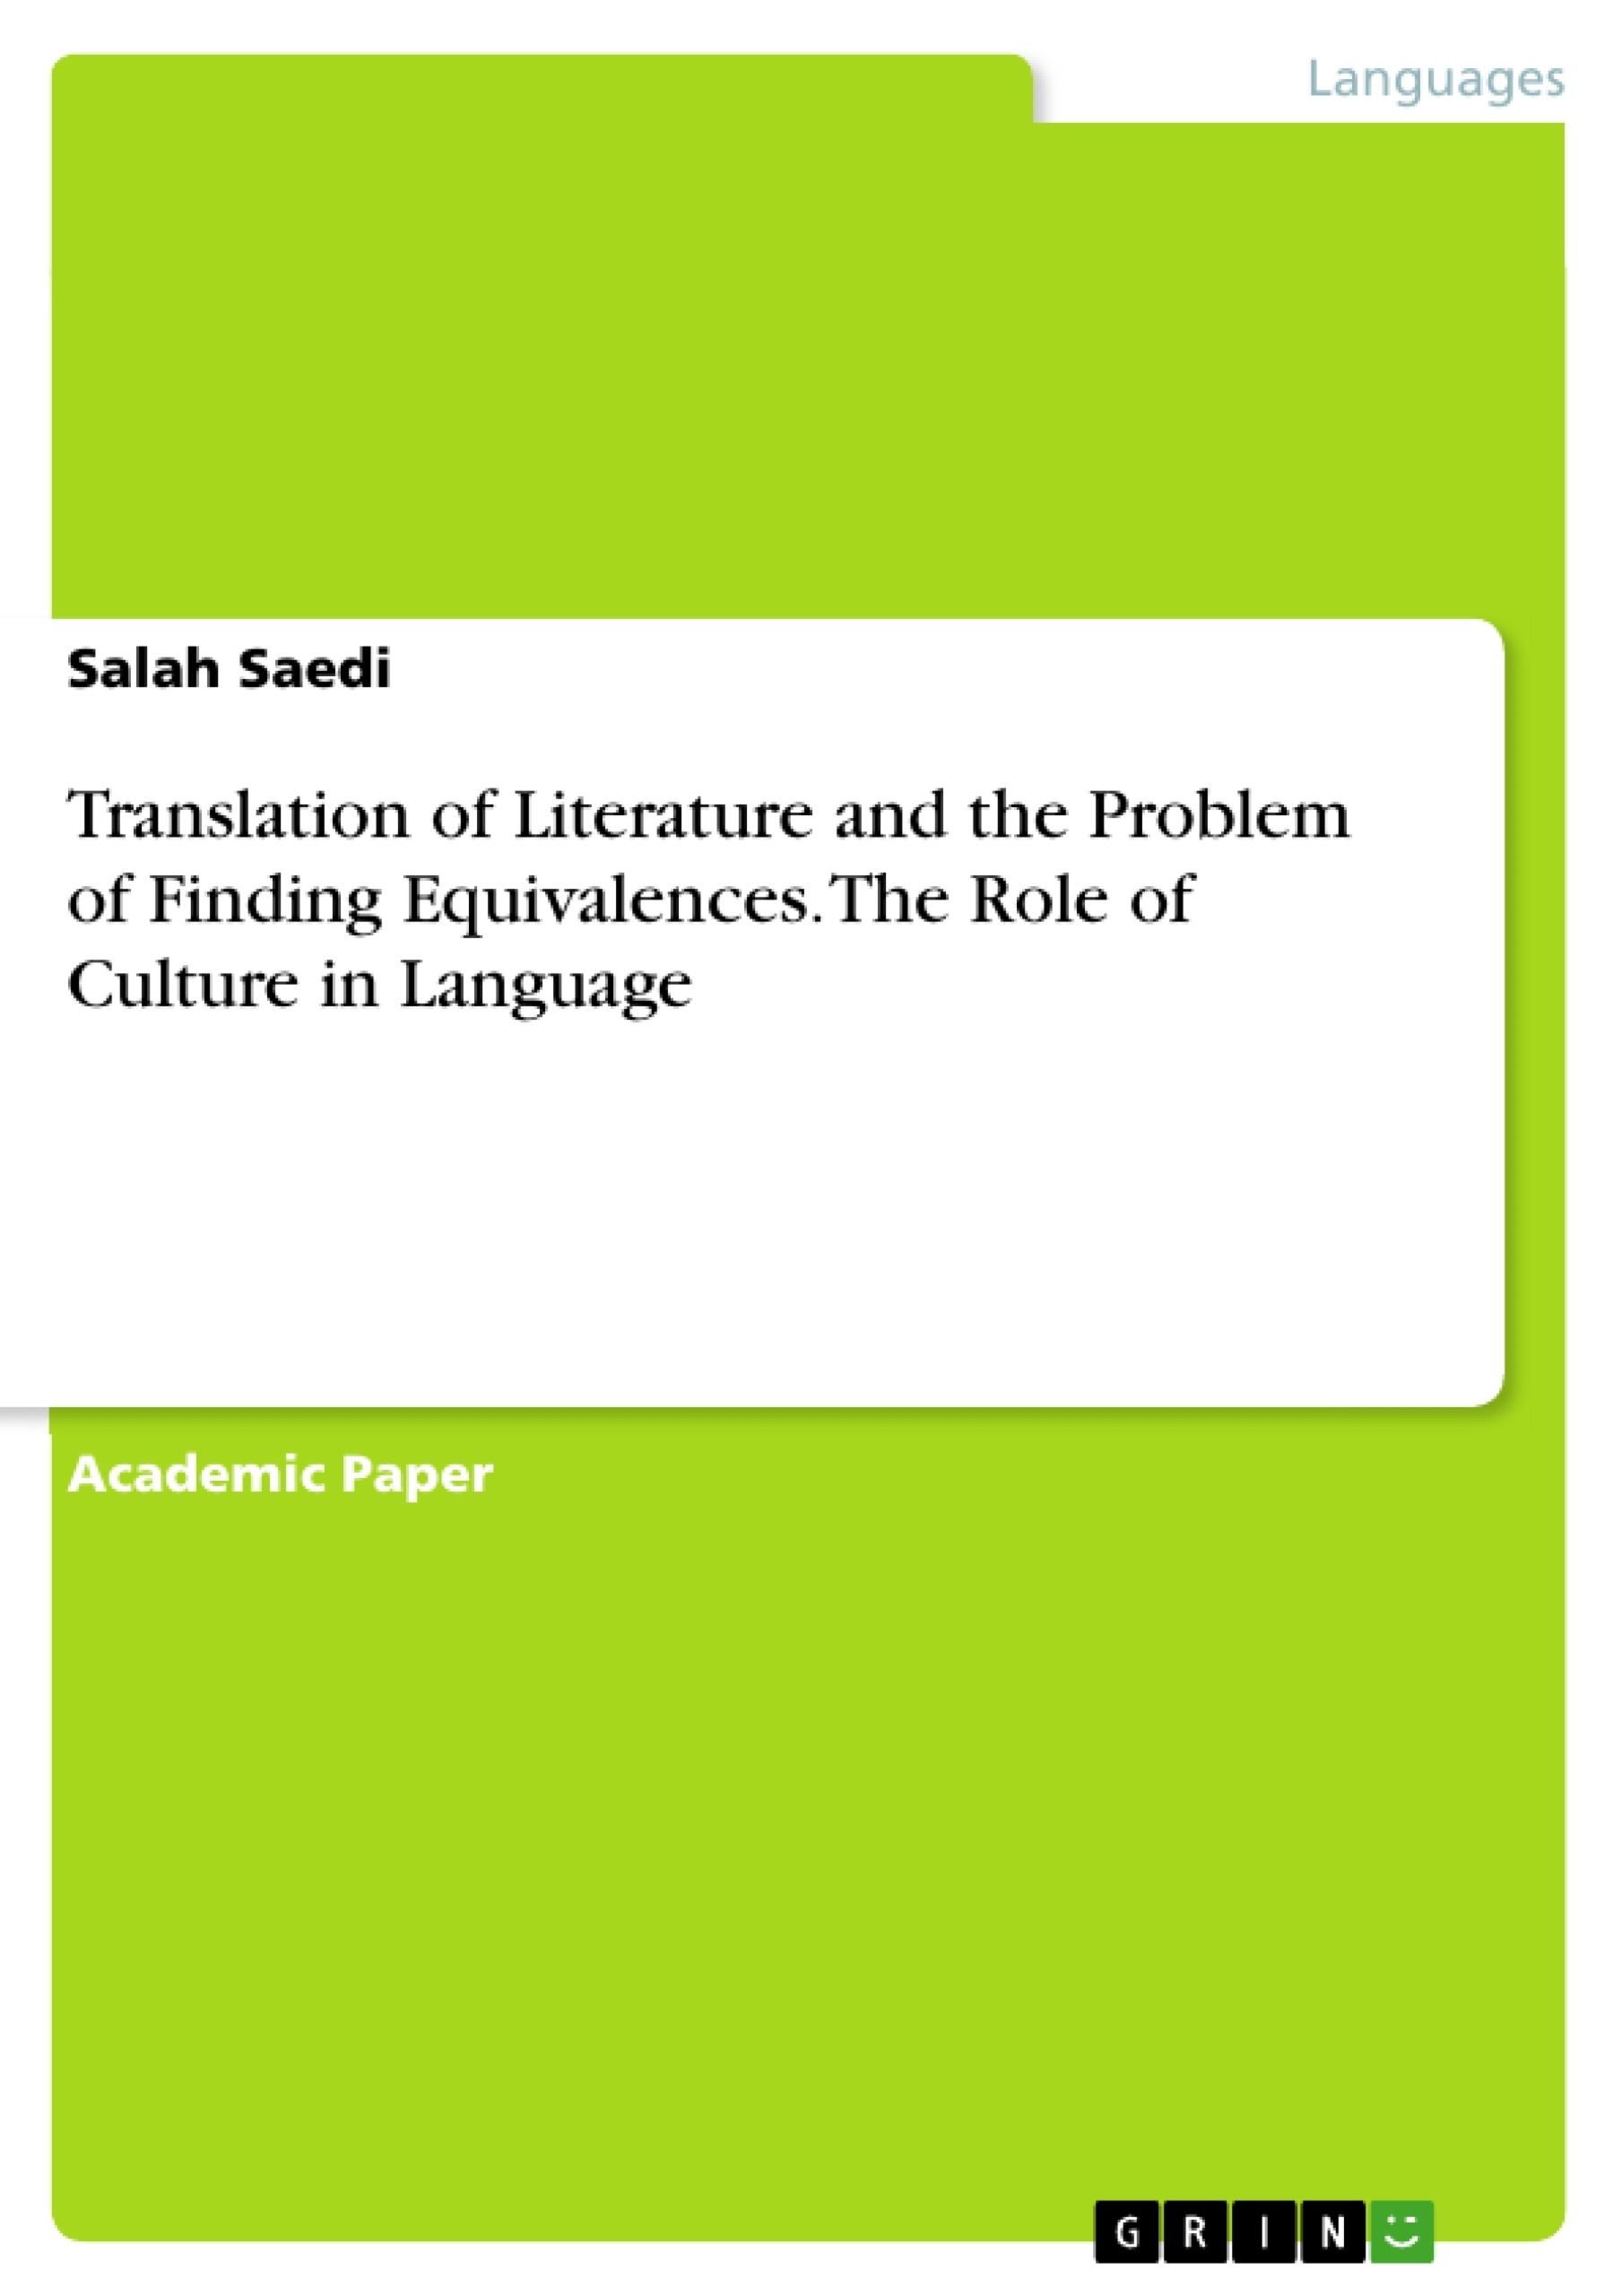 Title: Translation of Literature and the Problem of Finding Equivalences. The Role of Culture in Language